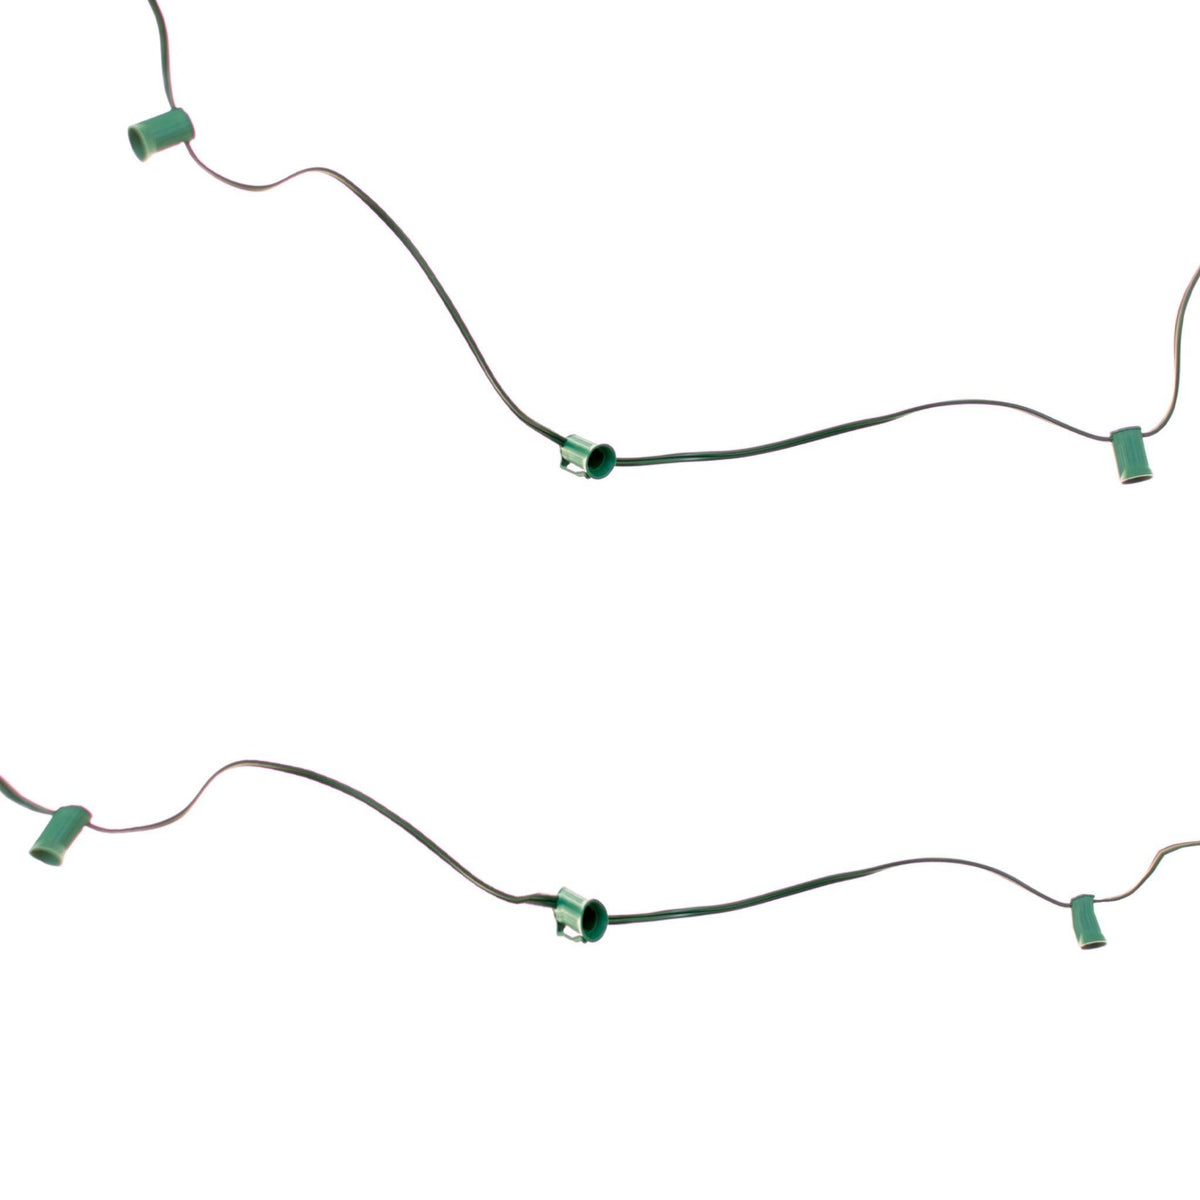 25FT Clear Outdoor String Lighting Set!    Choose between Twinkling Bulbs and Steady Burning Bulbs, White Wire or Green Wire Cords, C7 & C9 Size available.  Shop now at leedisplay.com